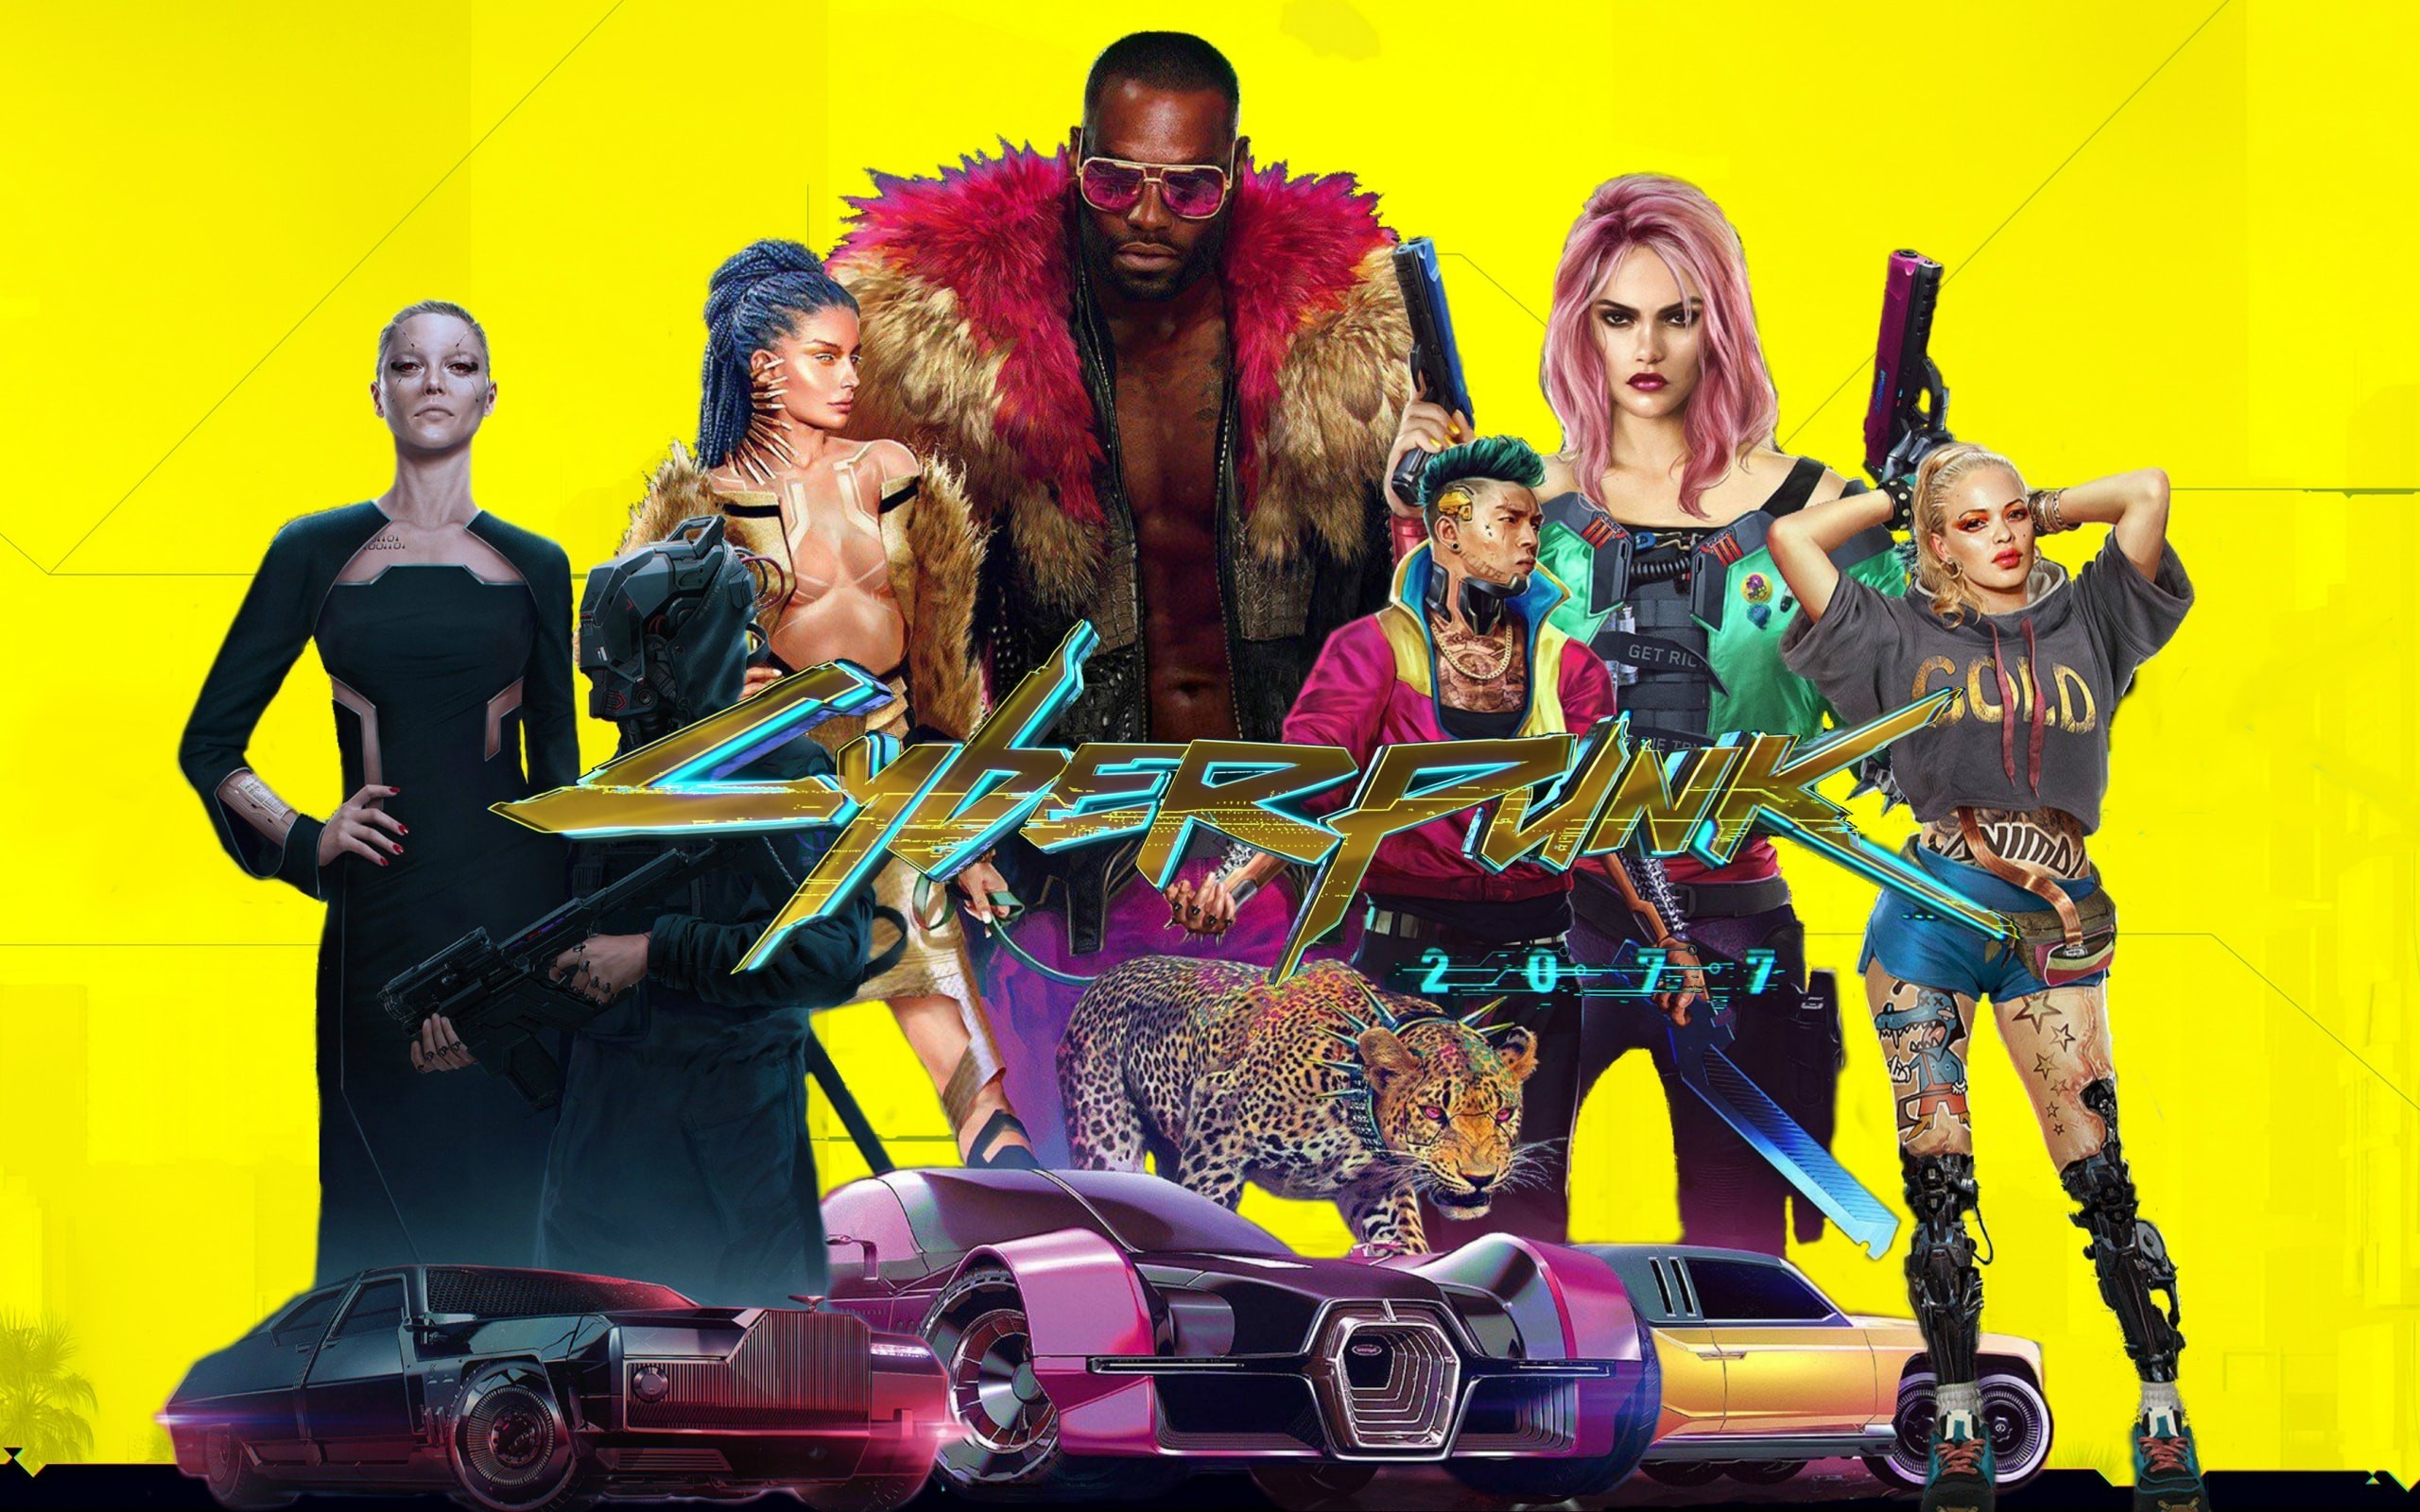 Cyberpunk 2077 wallpapers for desktop, download free Cyberpunk 2077  pictures and backgrounds for PC